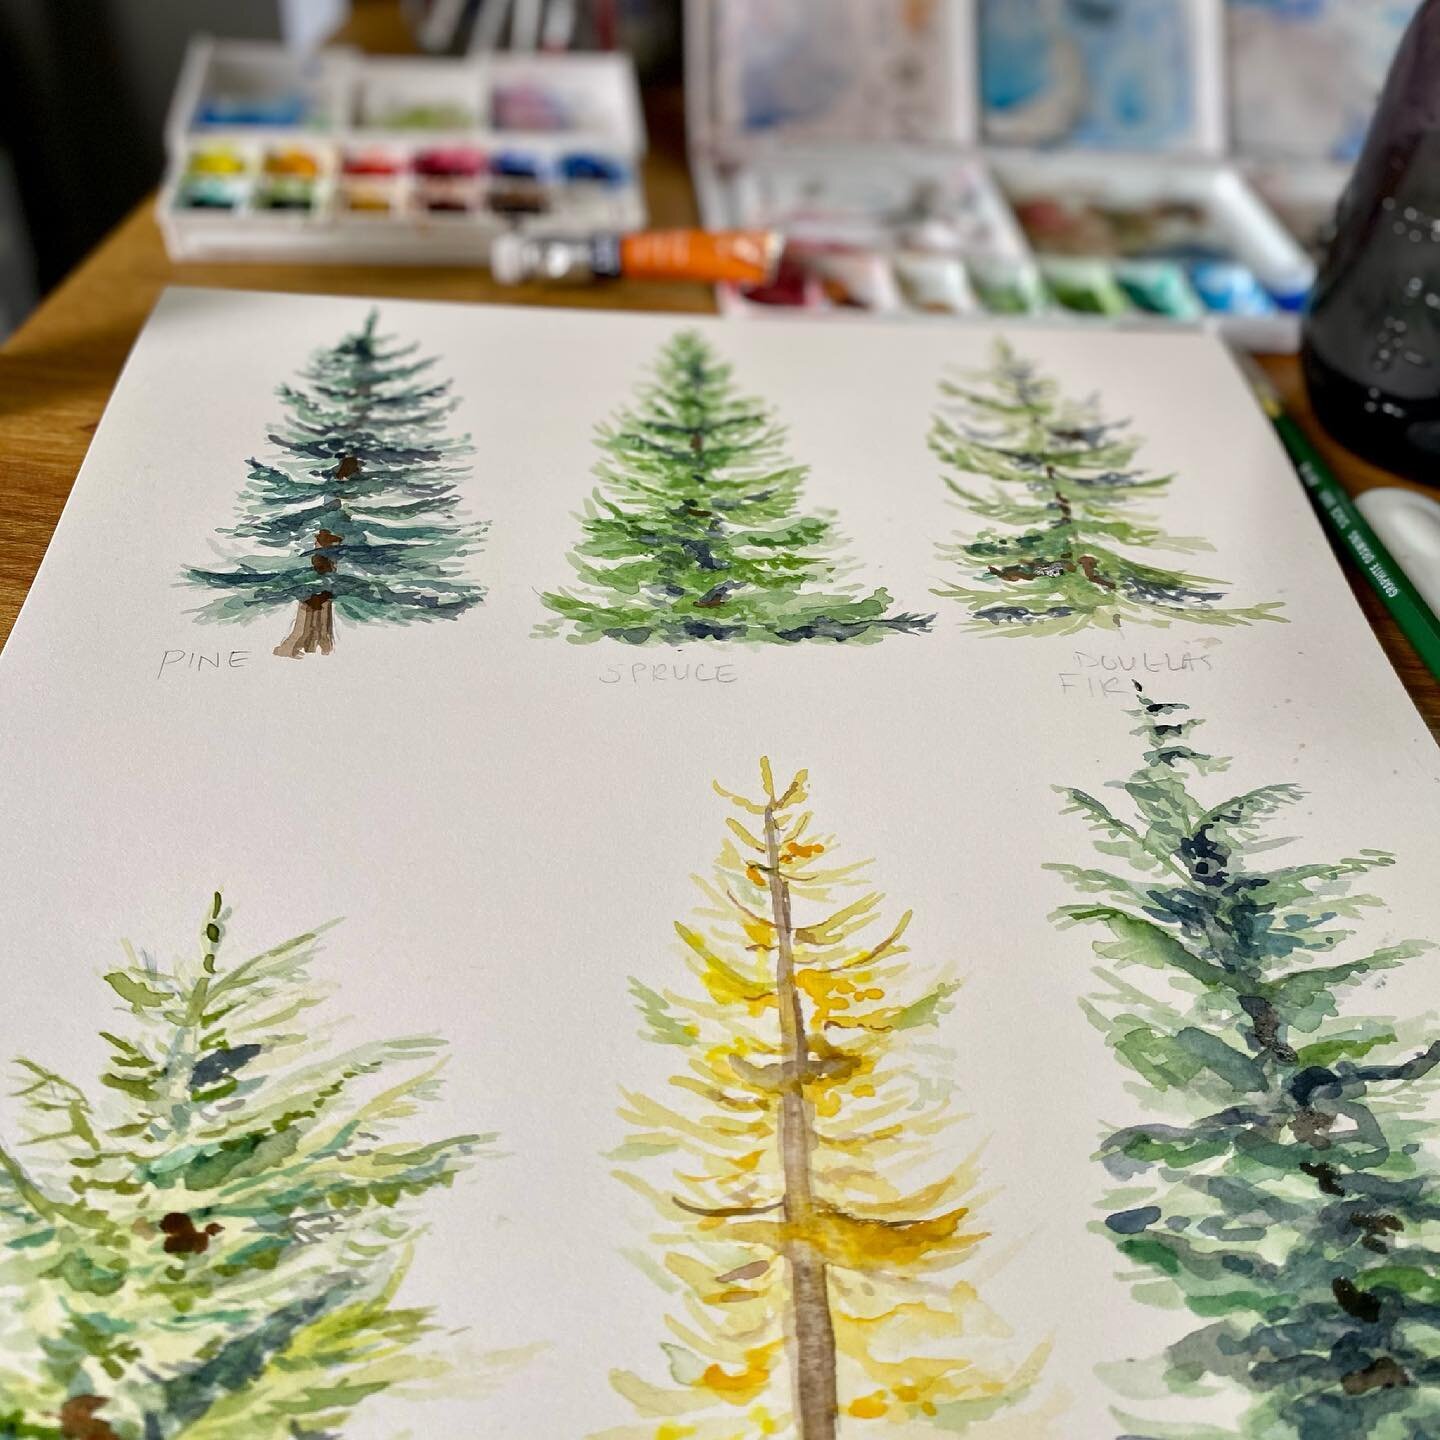 Practicing coniferous trees today. I&rsquo;ve been wanting to master trees for a while and this cool rainy weather is the perfect day to take a step toward that goal. 

#practicemakesprogress #coniferous #treesofinstagram #trees #illustration #waterc